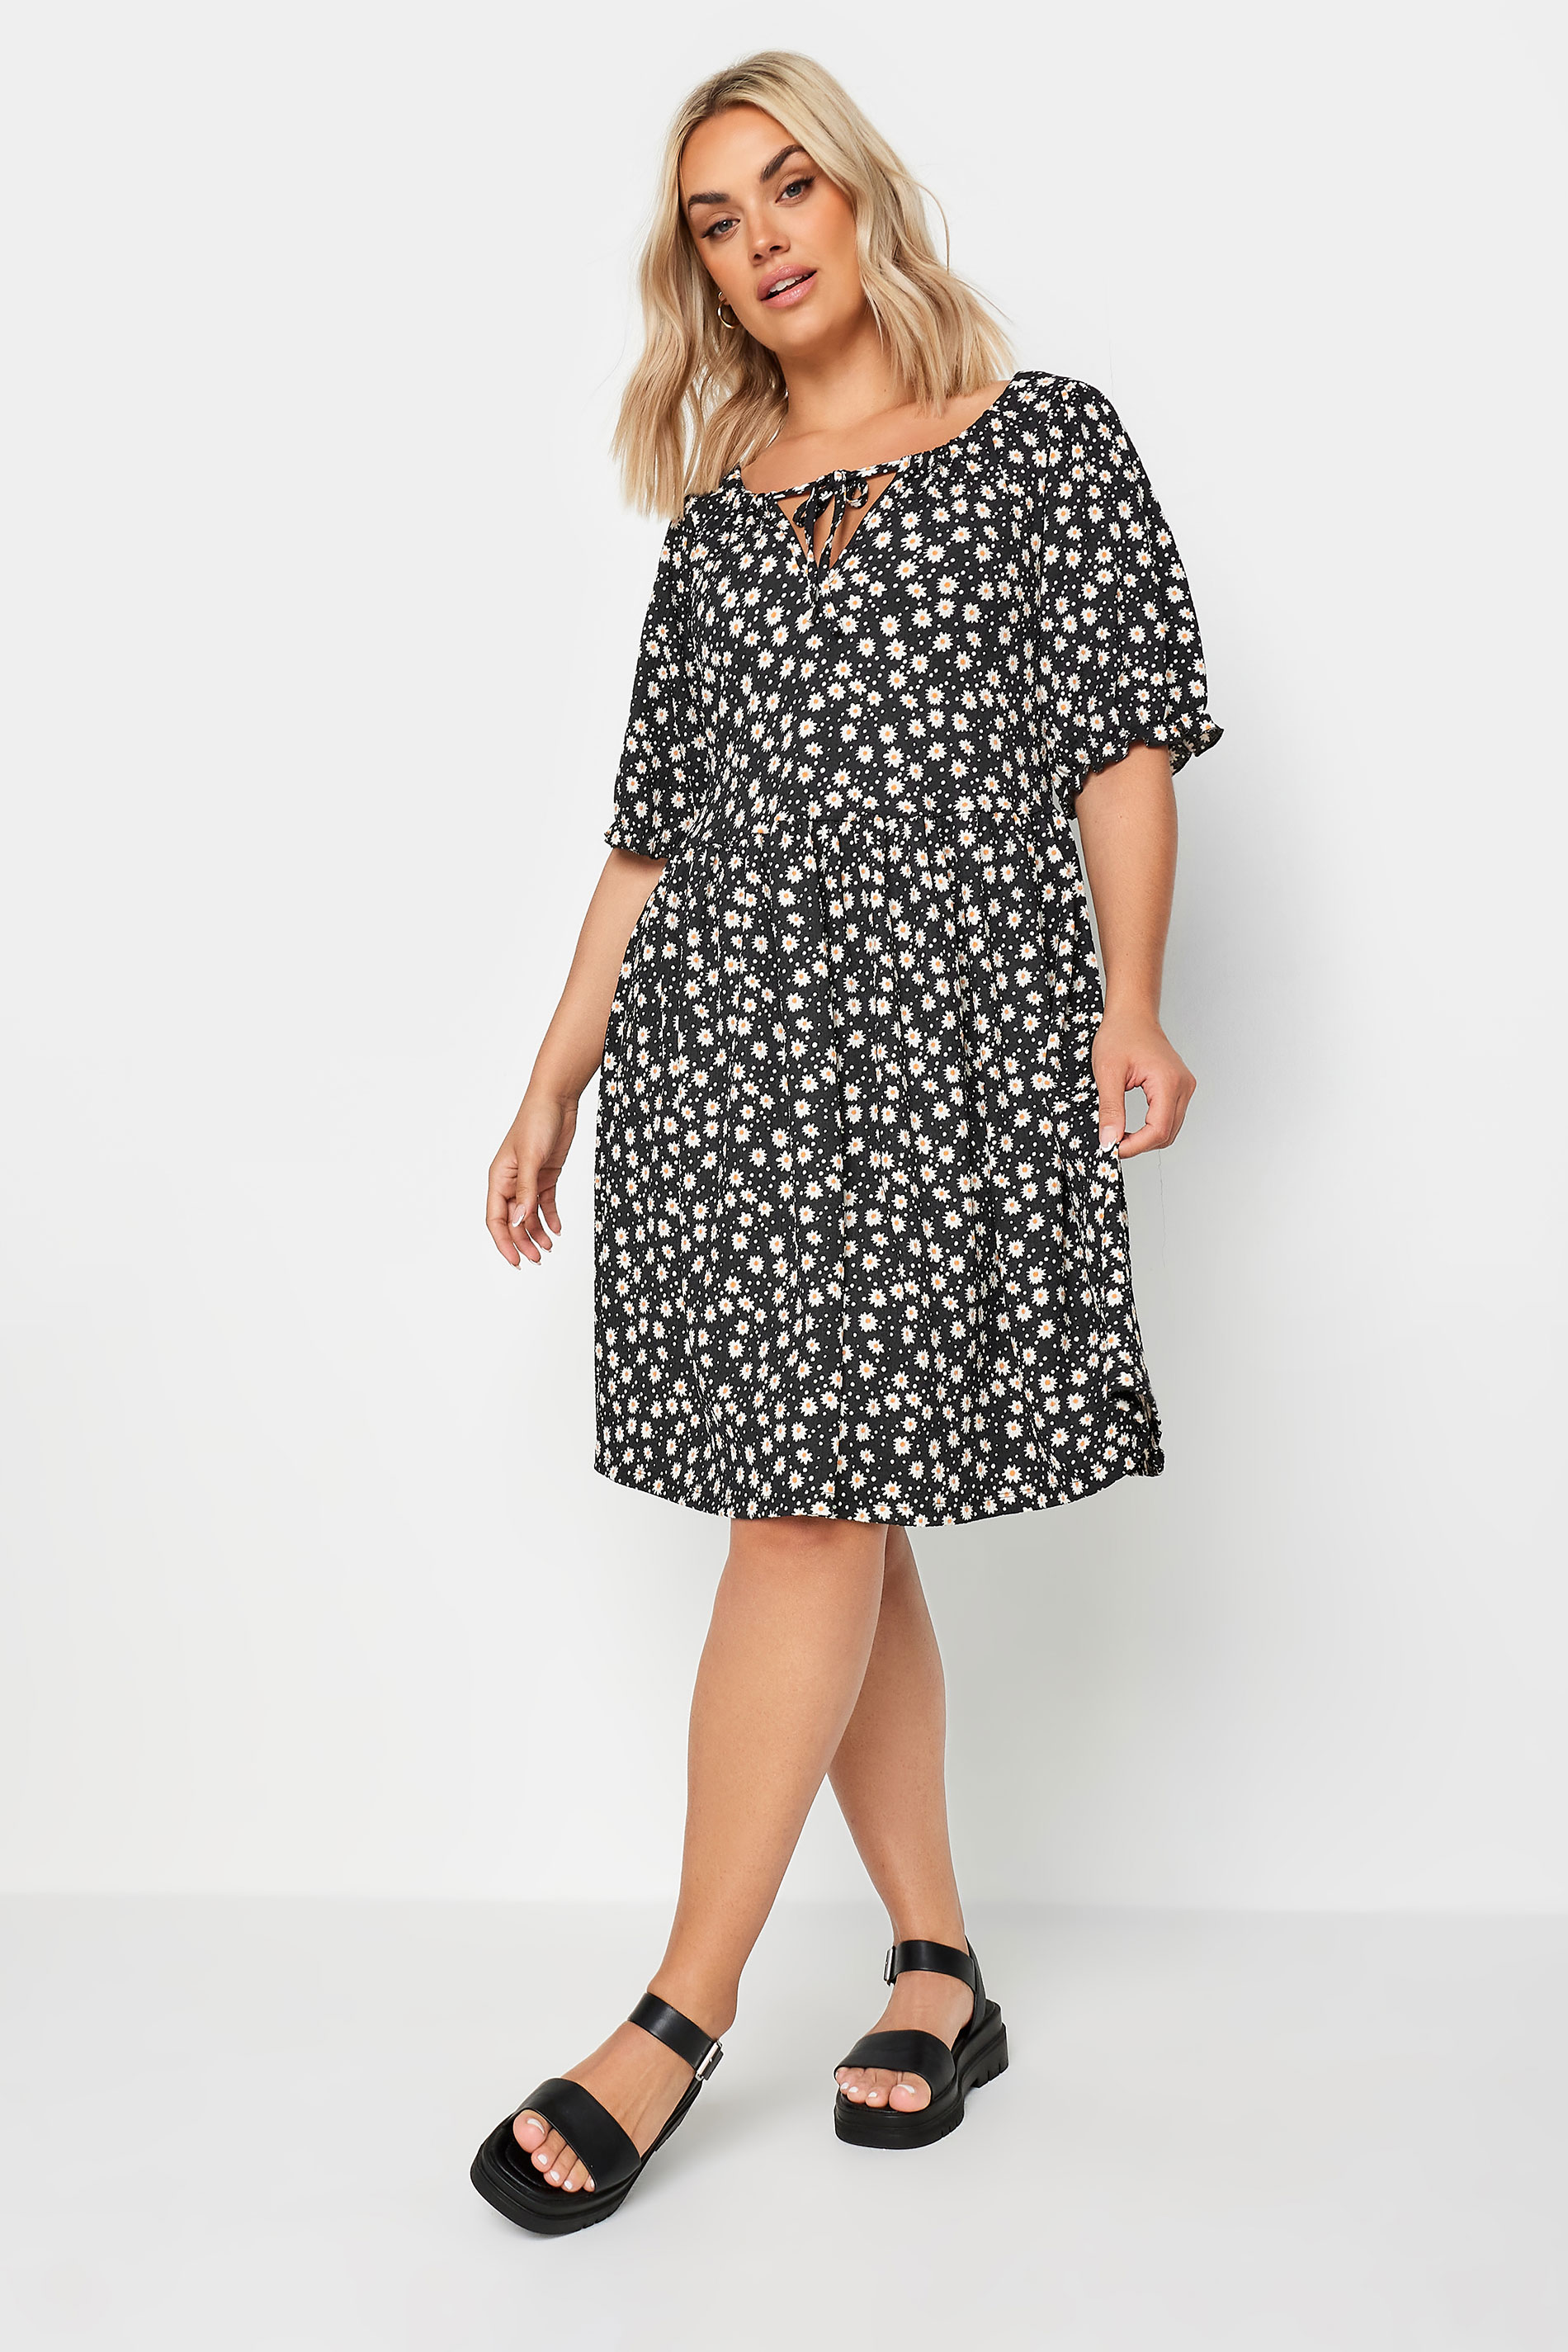 YOURS Plus Size Black Daisy Print Textured Mini Dress | Yours Clothing 1